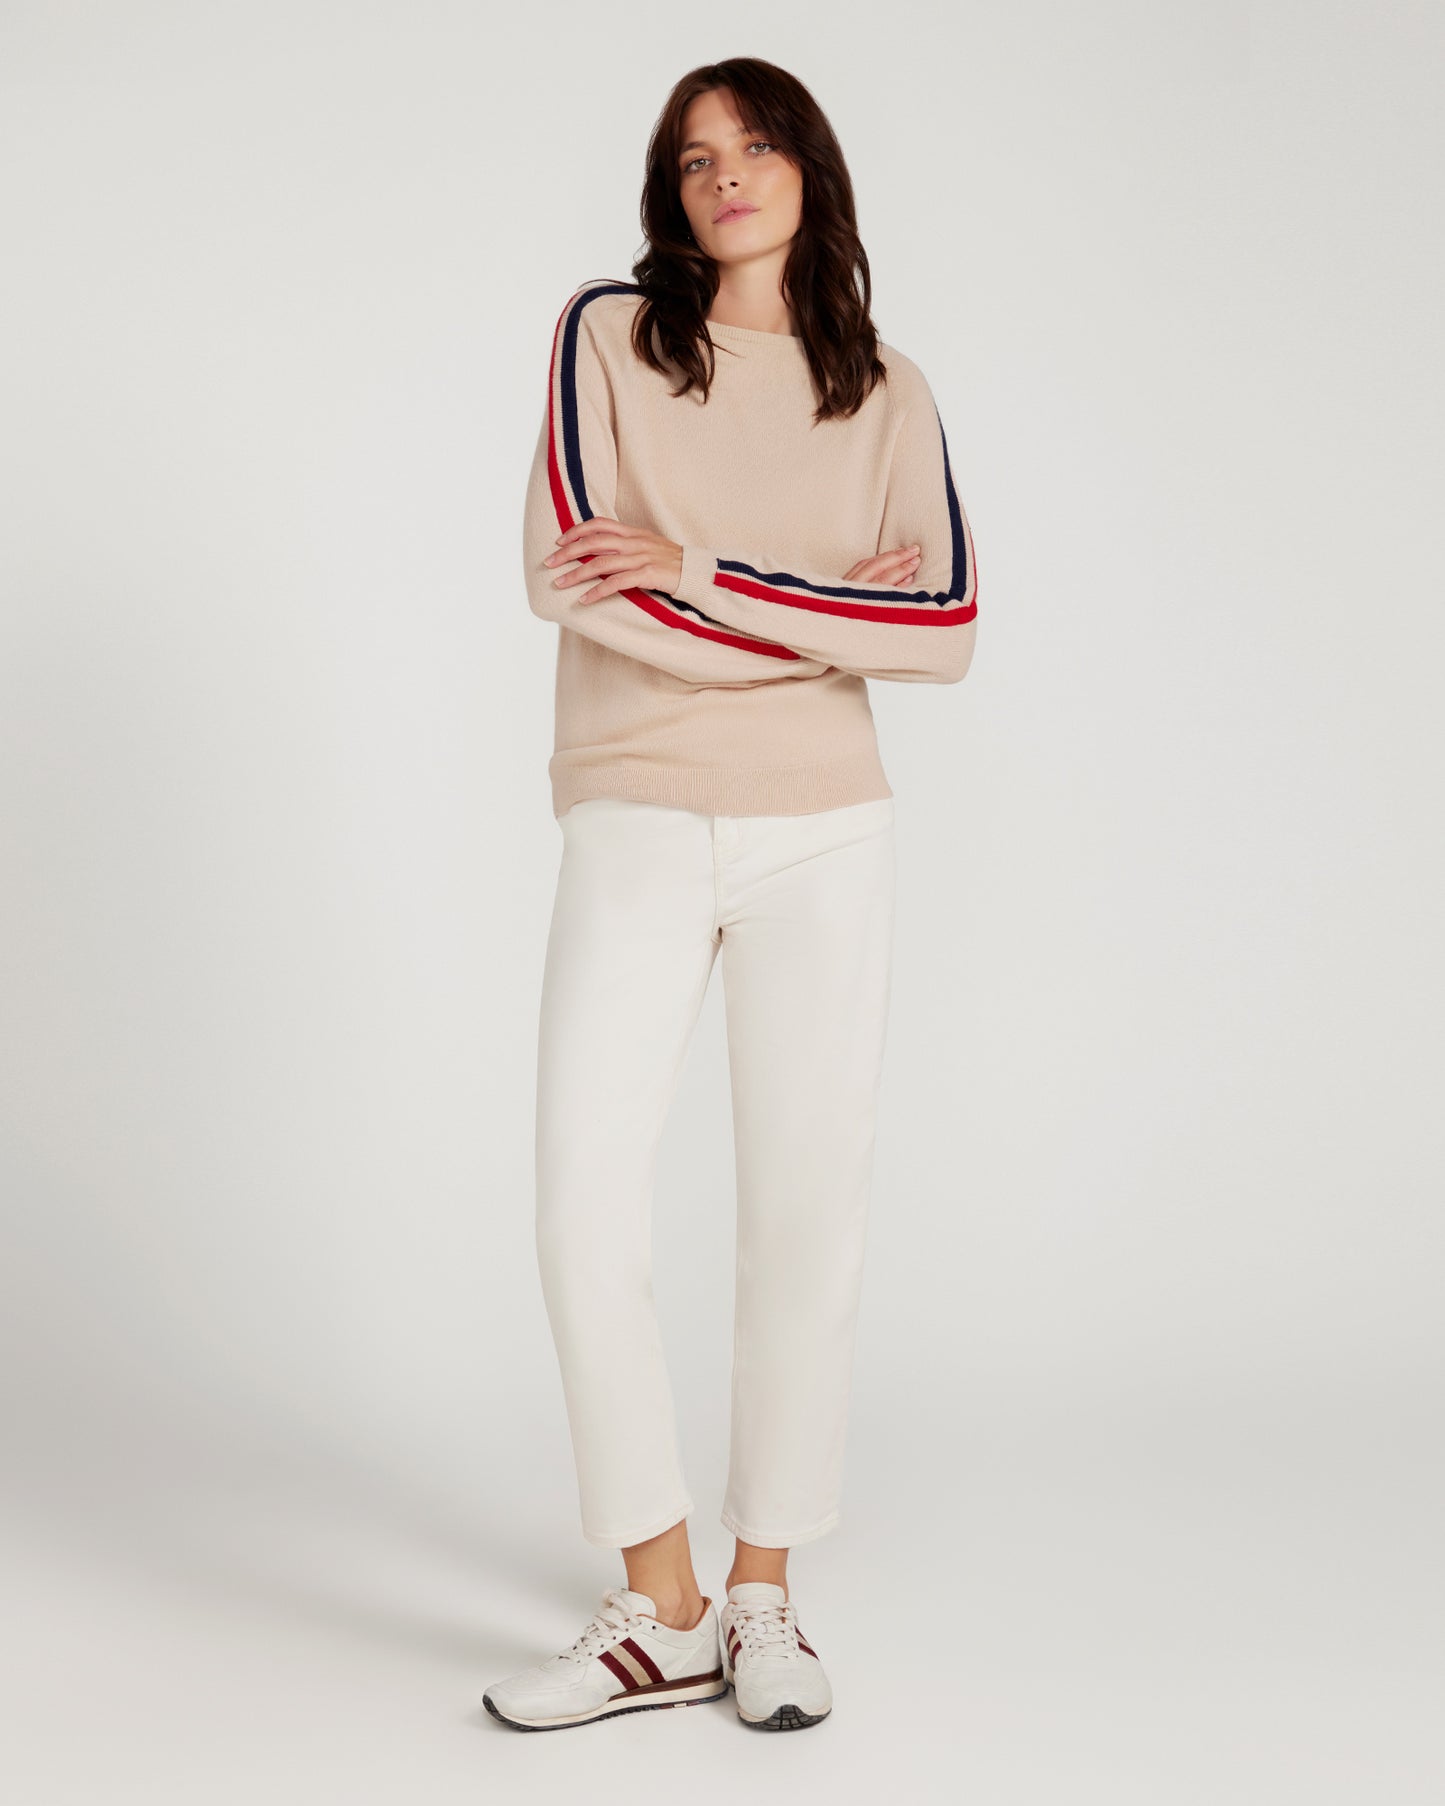 Cashmere & Wool French Racer 2 Crewneck Sweater - BEIGE